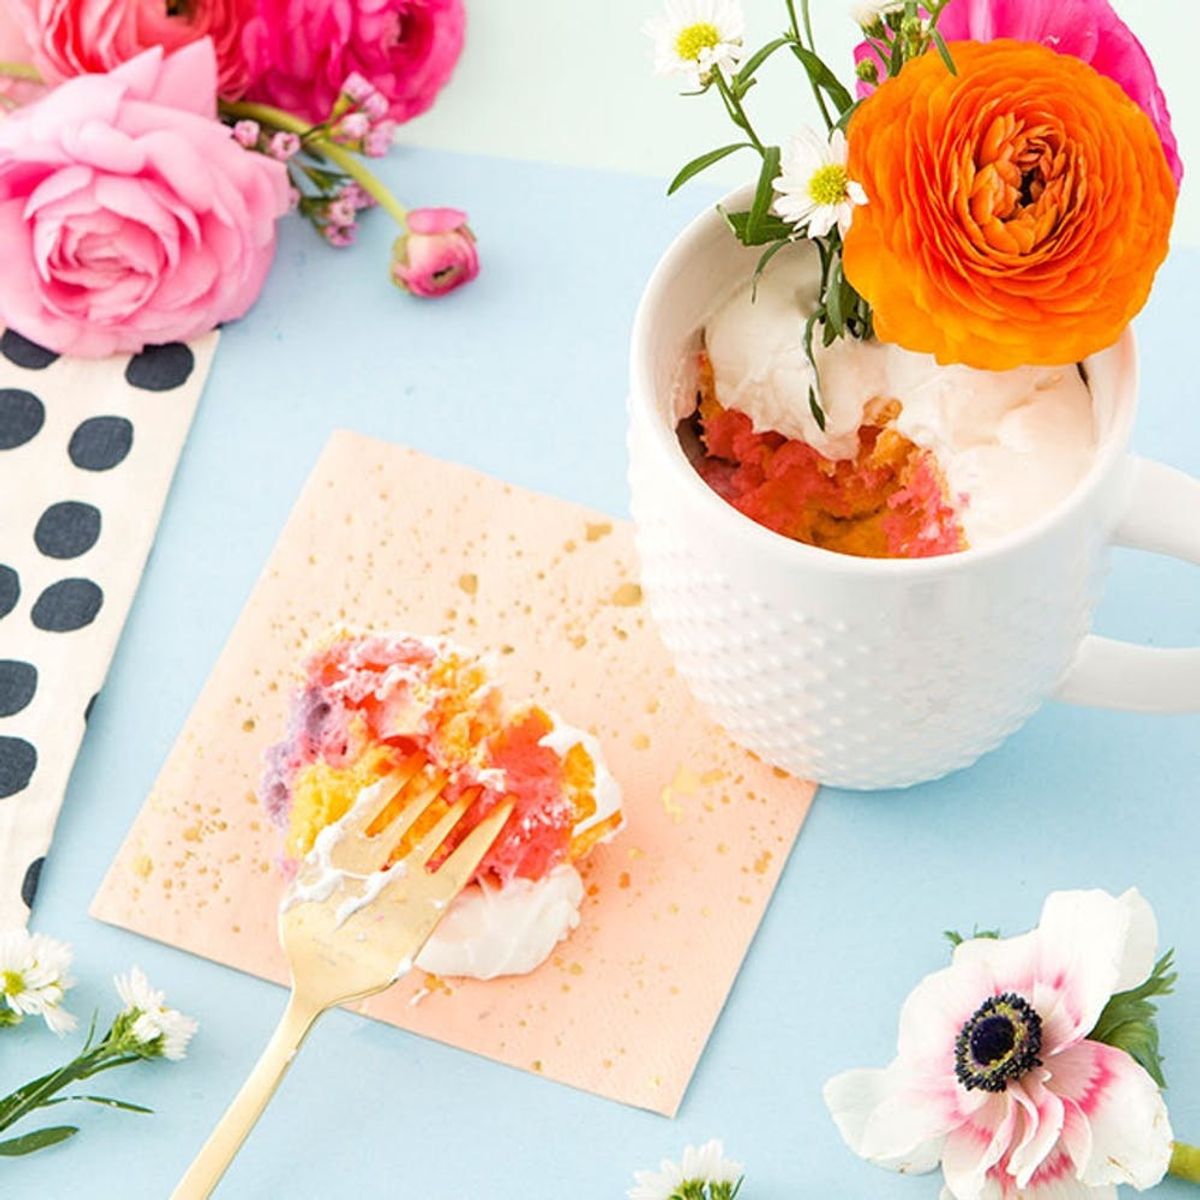 Make This Tie-Dye Cake in a Mug for Mother’s Day